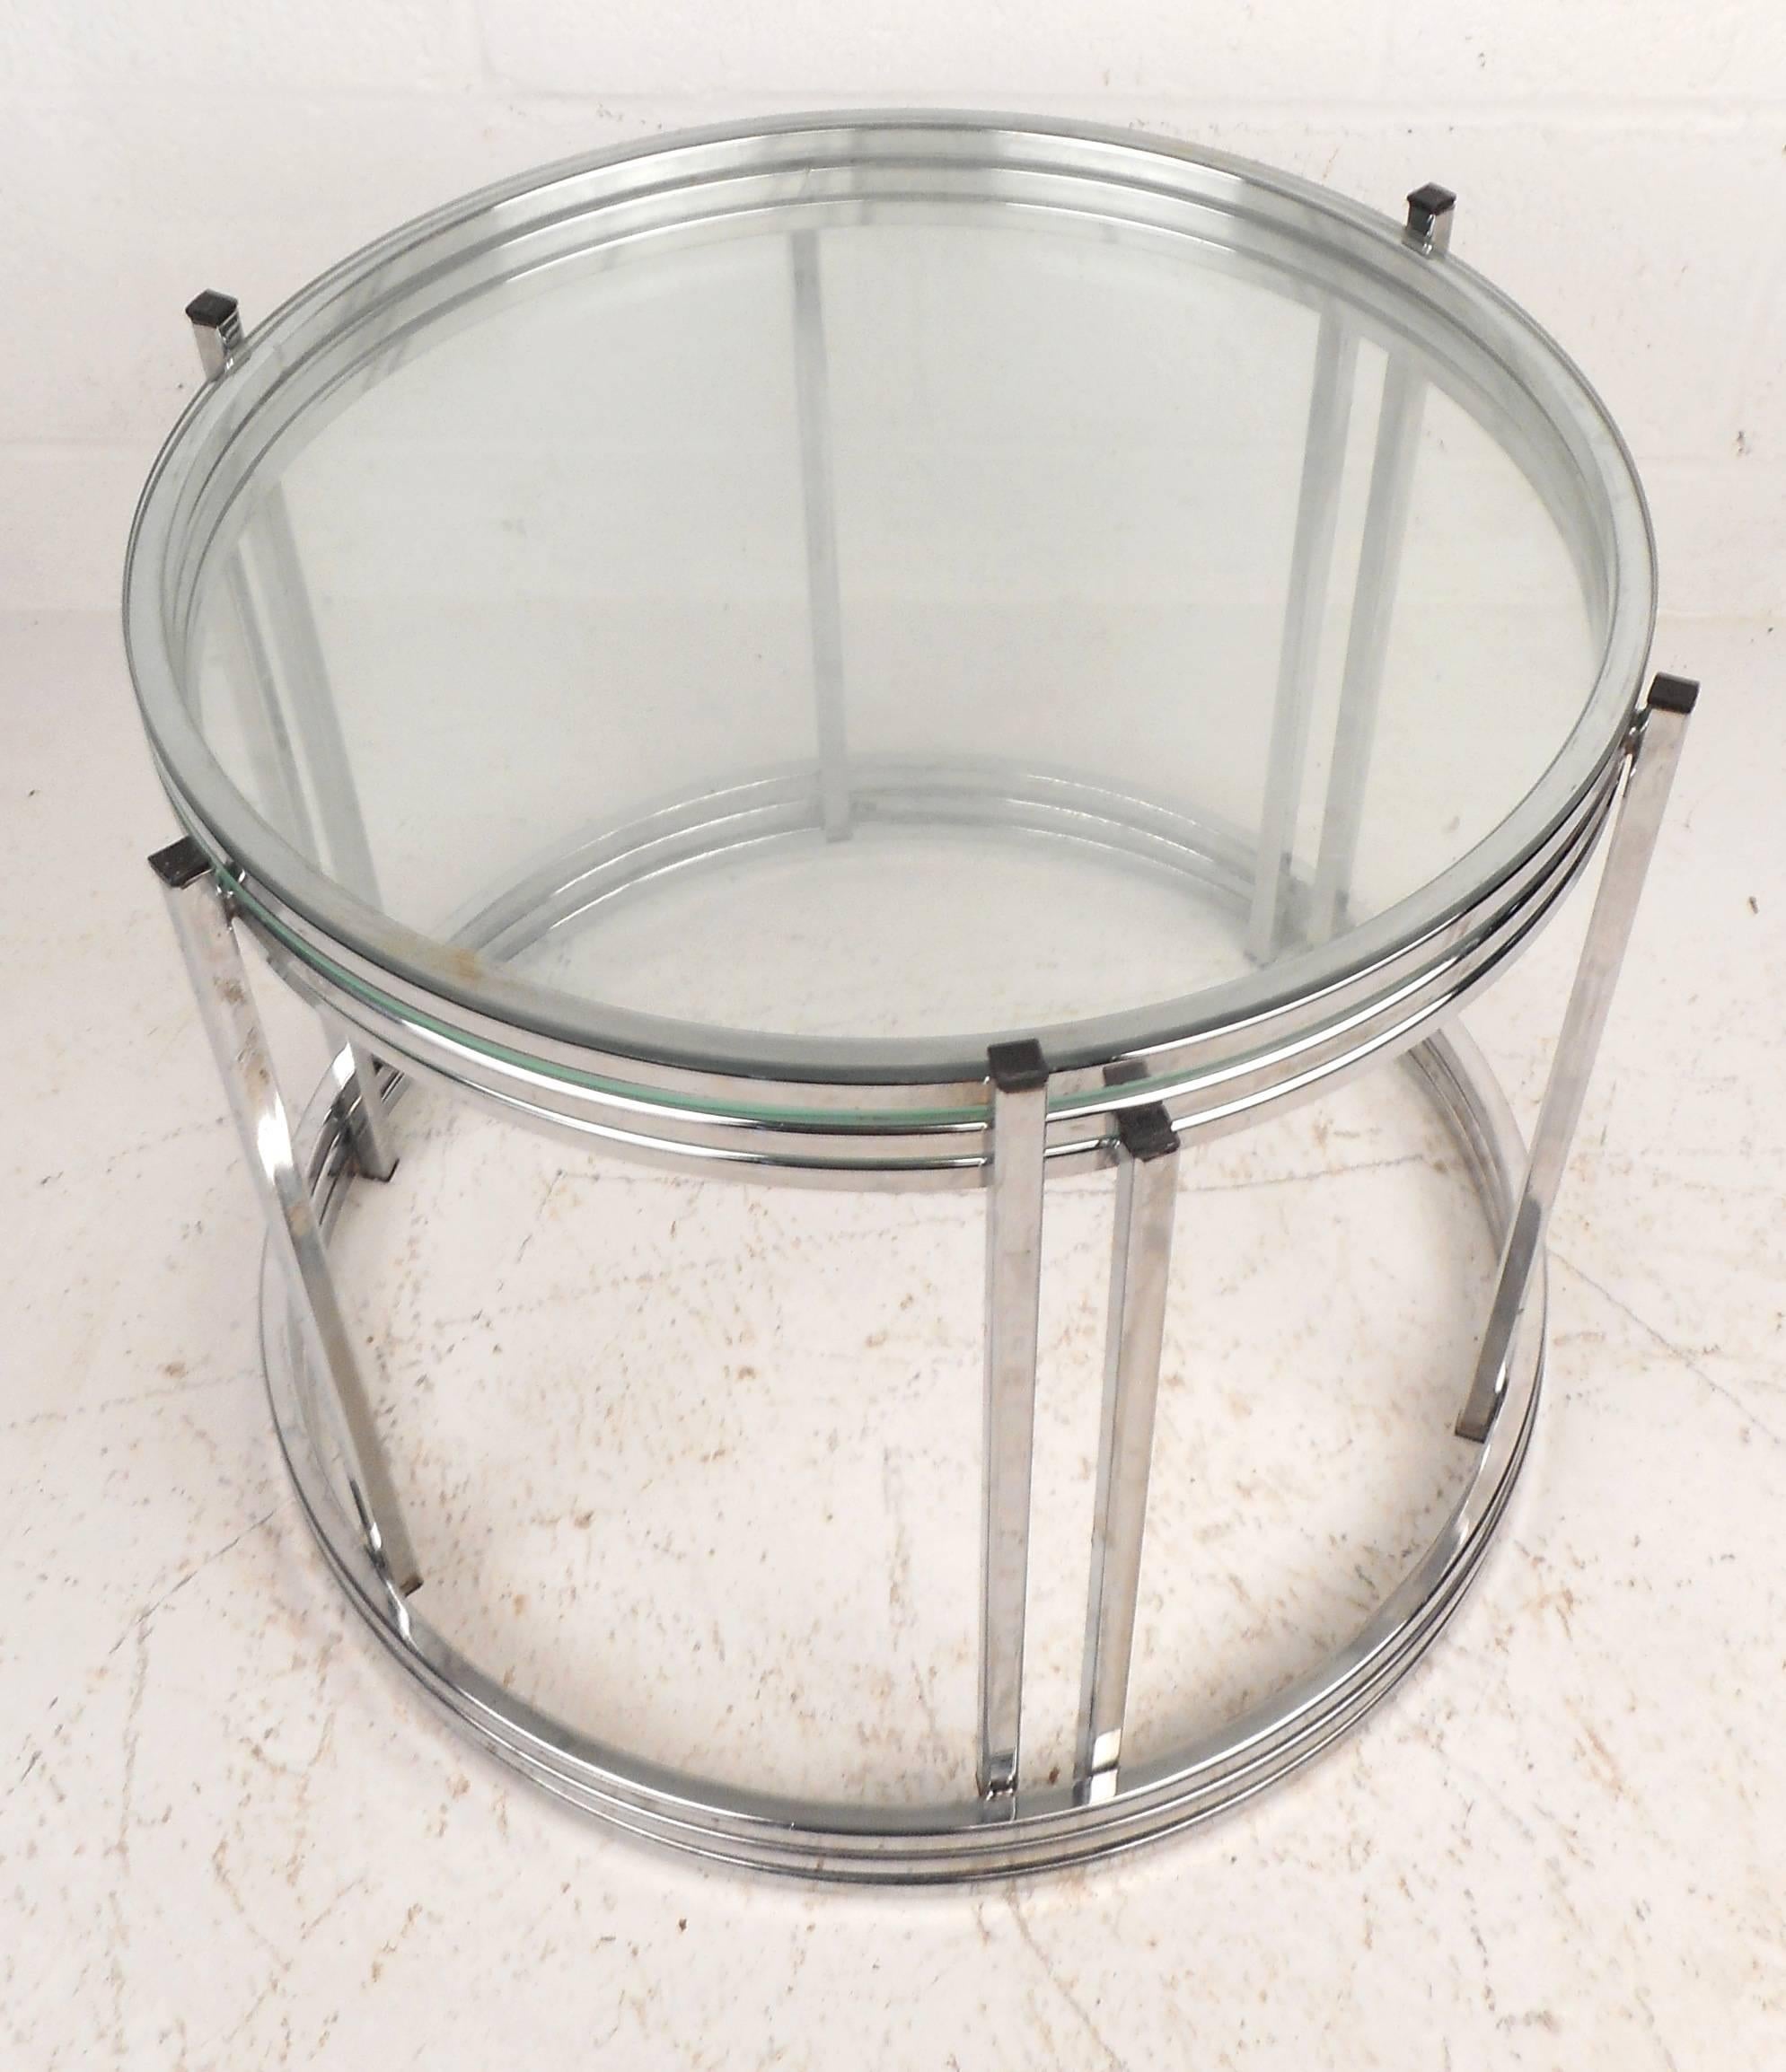 Elegant set of three Mid-Century Modern round stacking or nesting tables with sleek chrome frames and thick green glass tops. The versatile trio fits perfectly on top of each other providing convenience without sacrificing style. Perfect for small